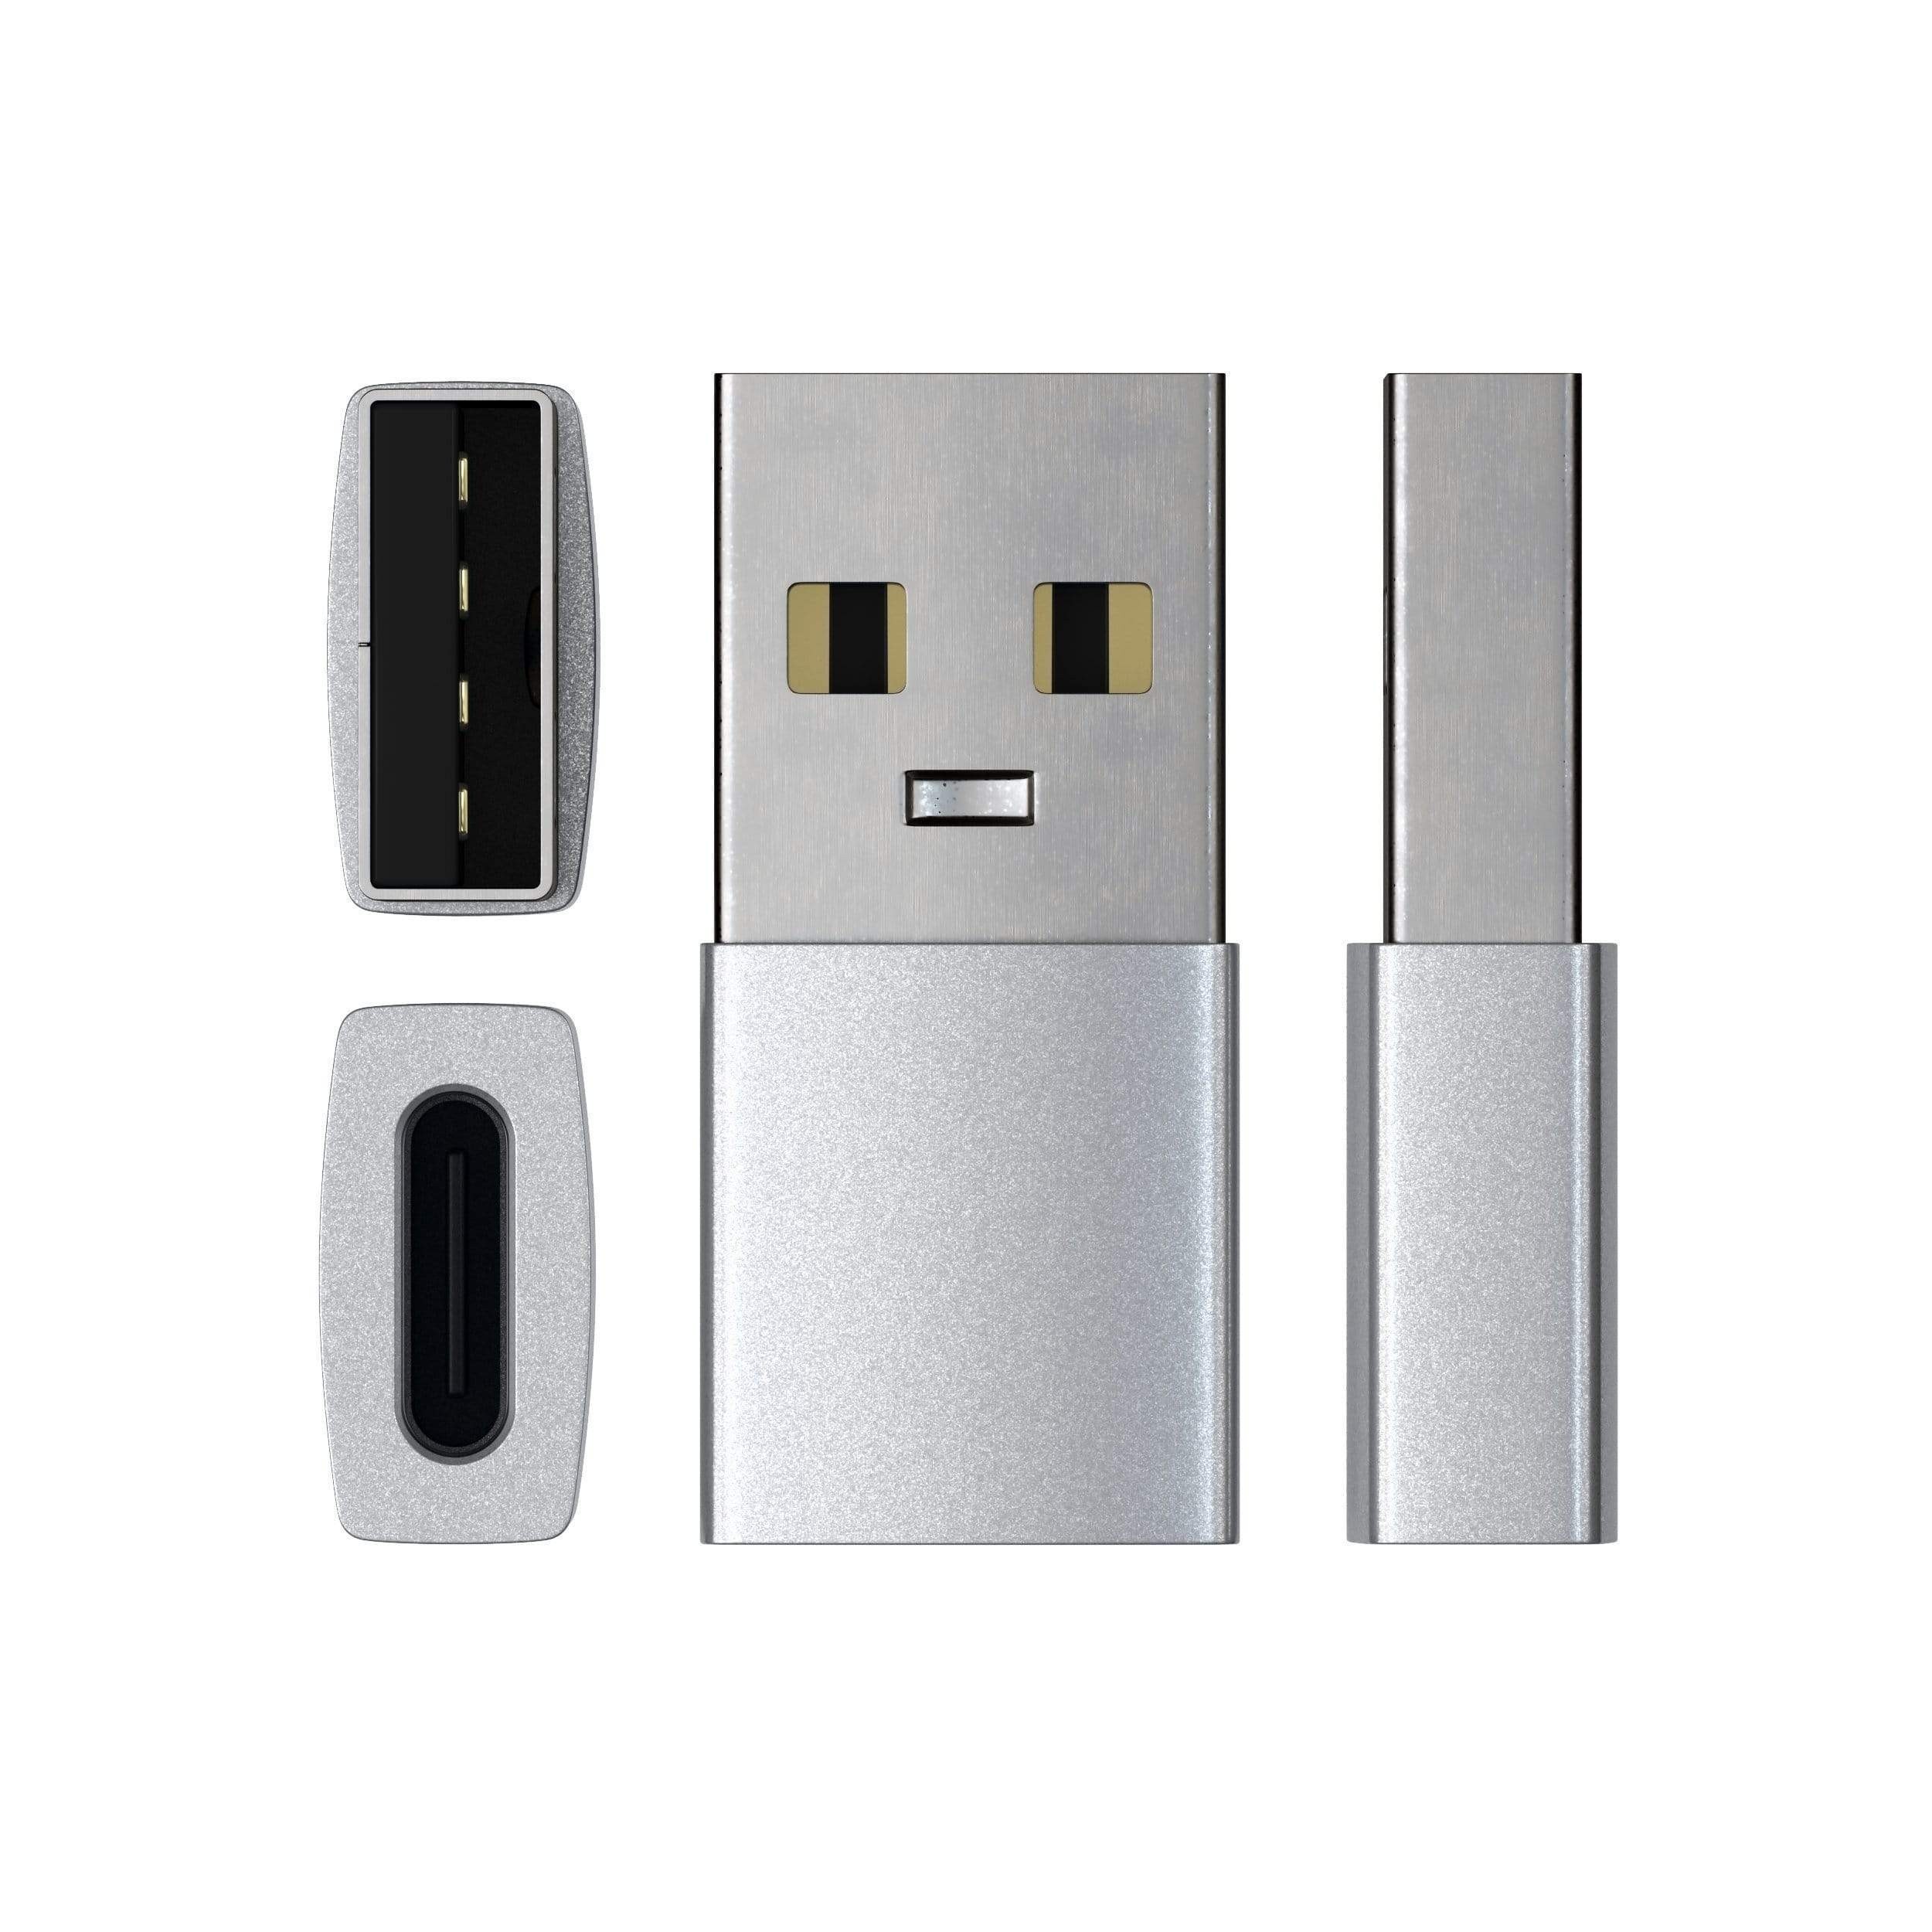 Картридер/USB-хаб Satechi Type-A To Type-C Adapter